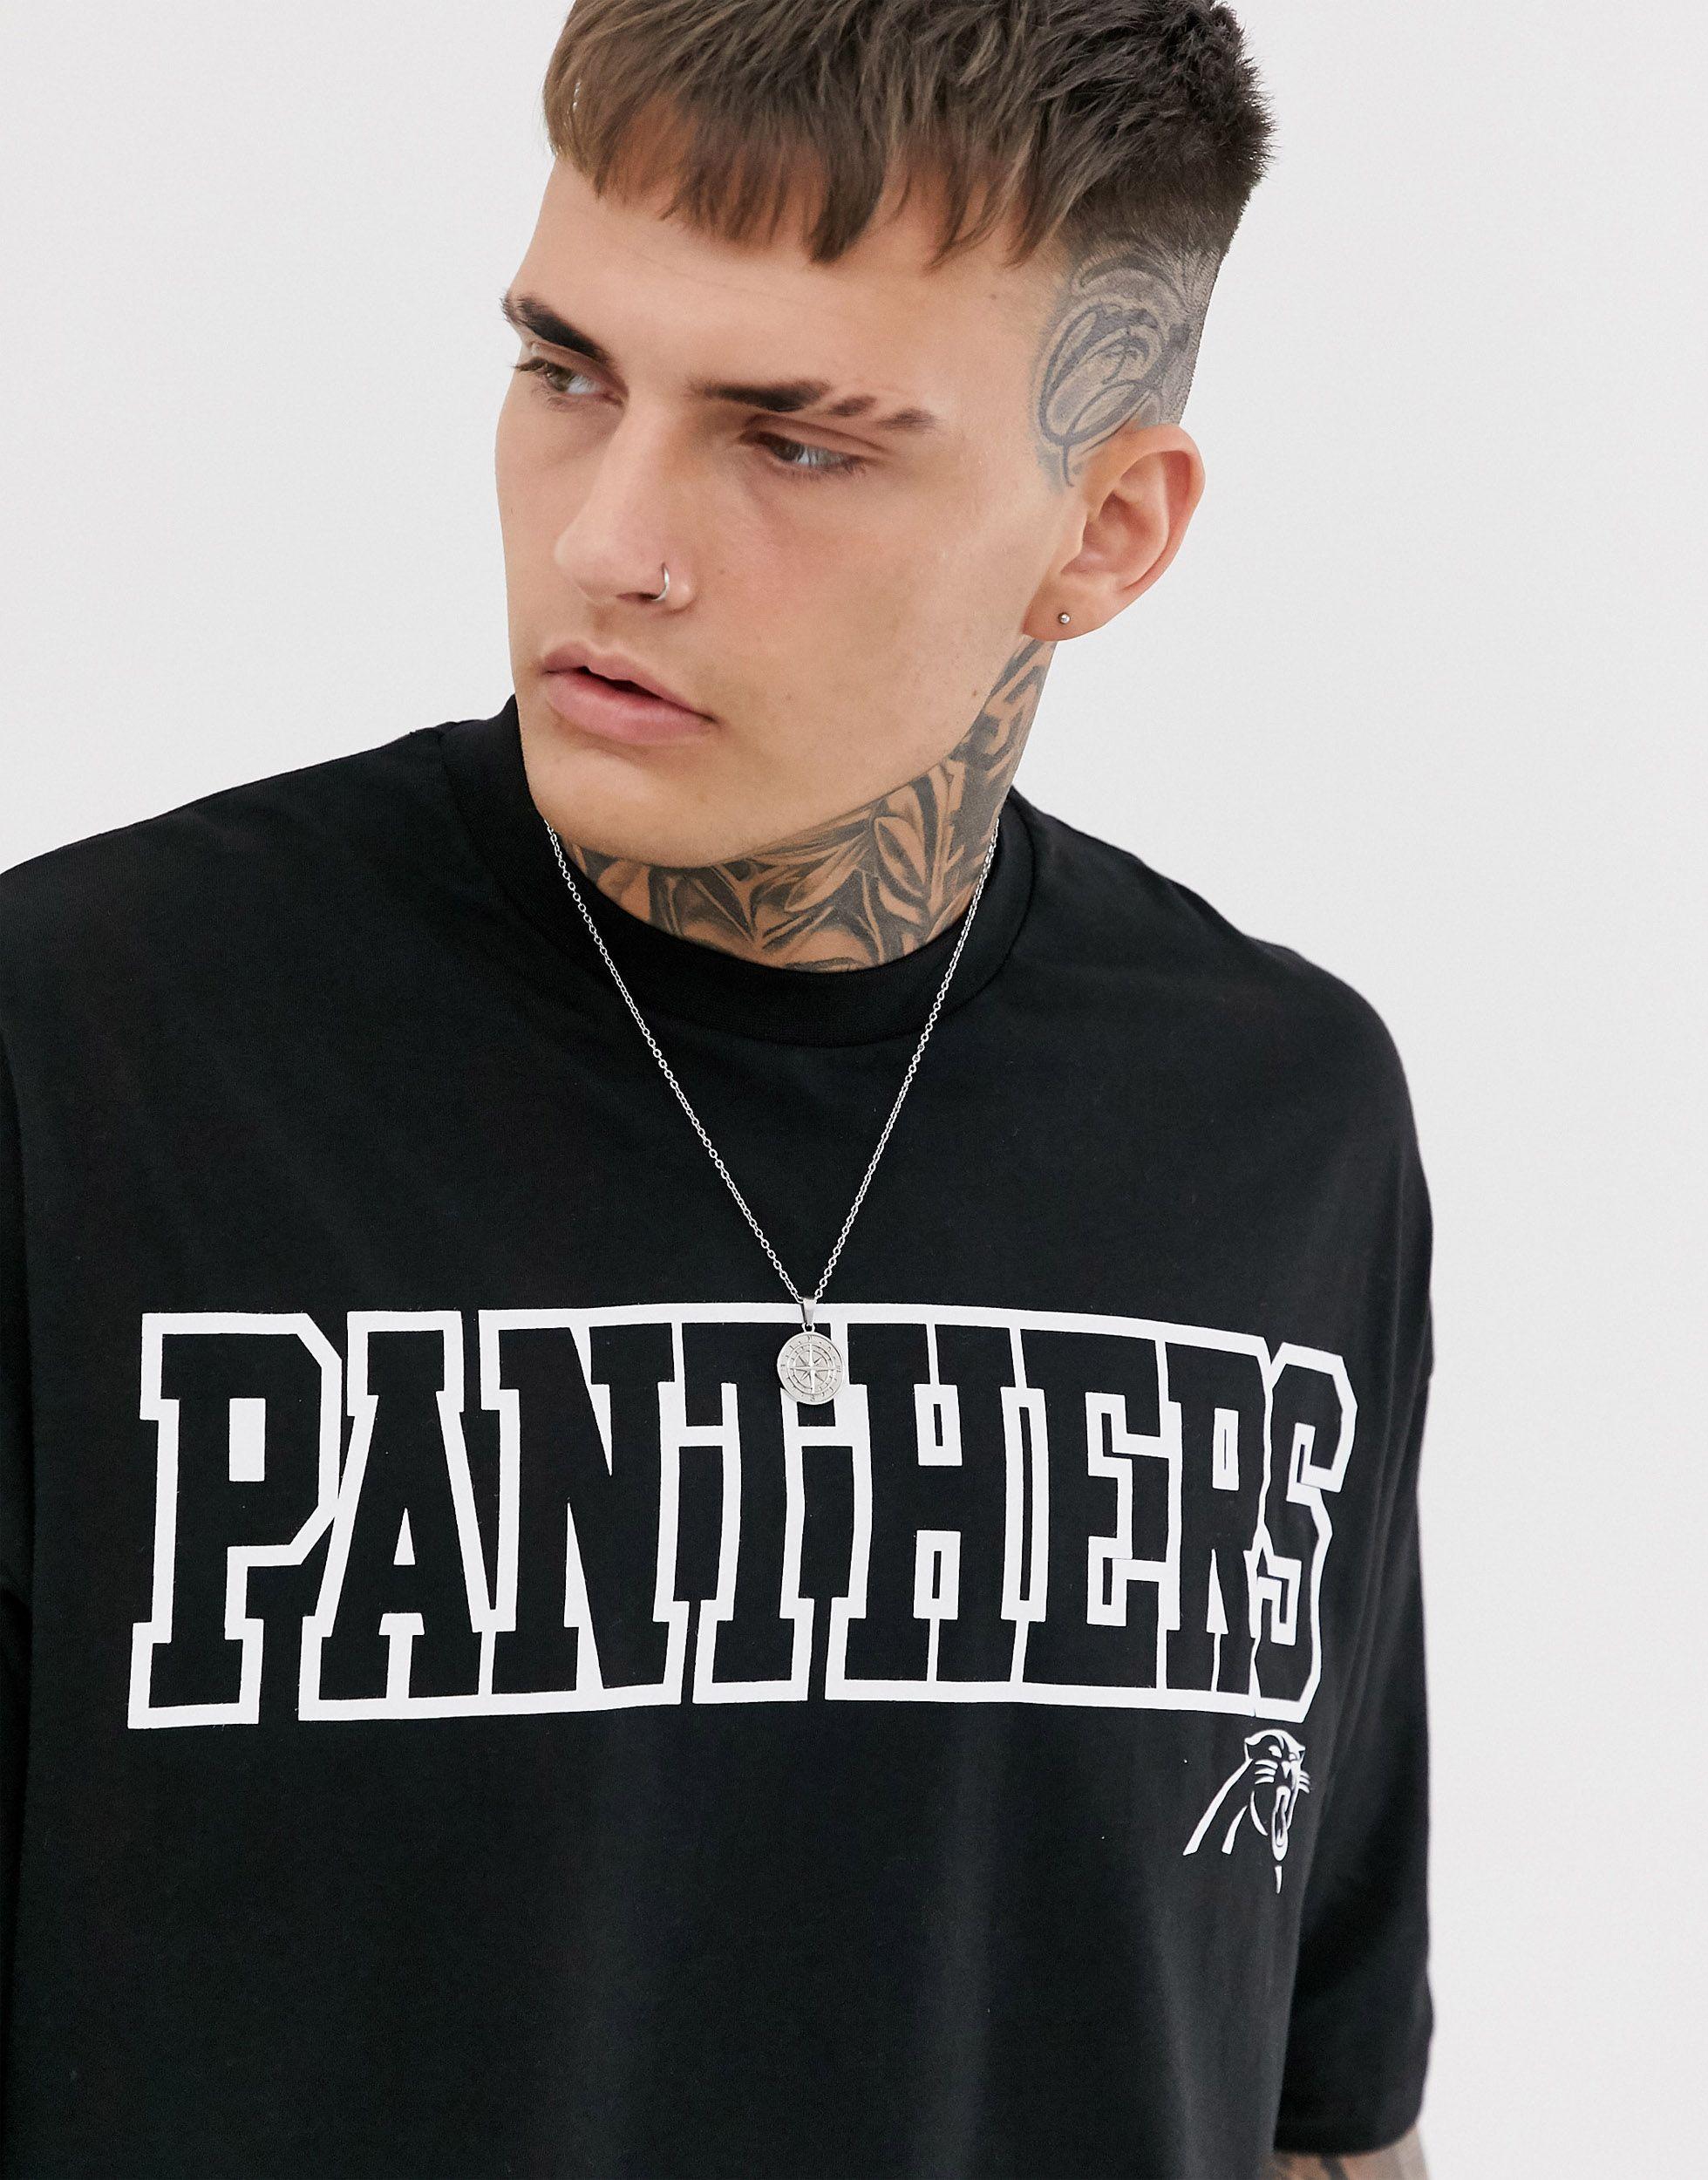 ASOS Nfl Panther Oversized T-shirt With Front And Back Print in